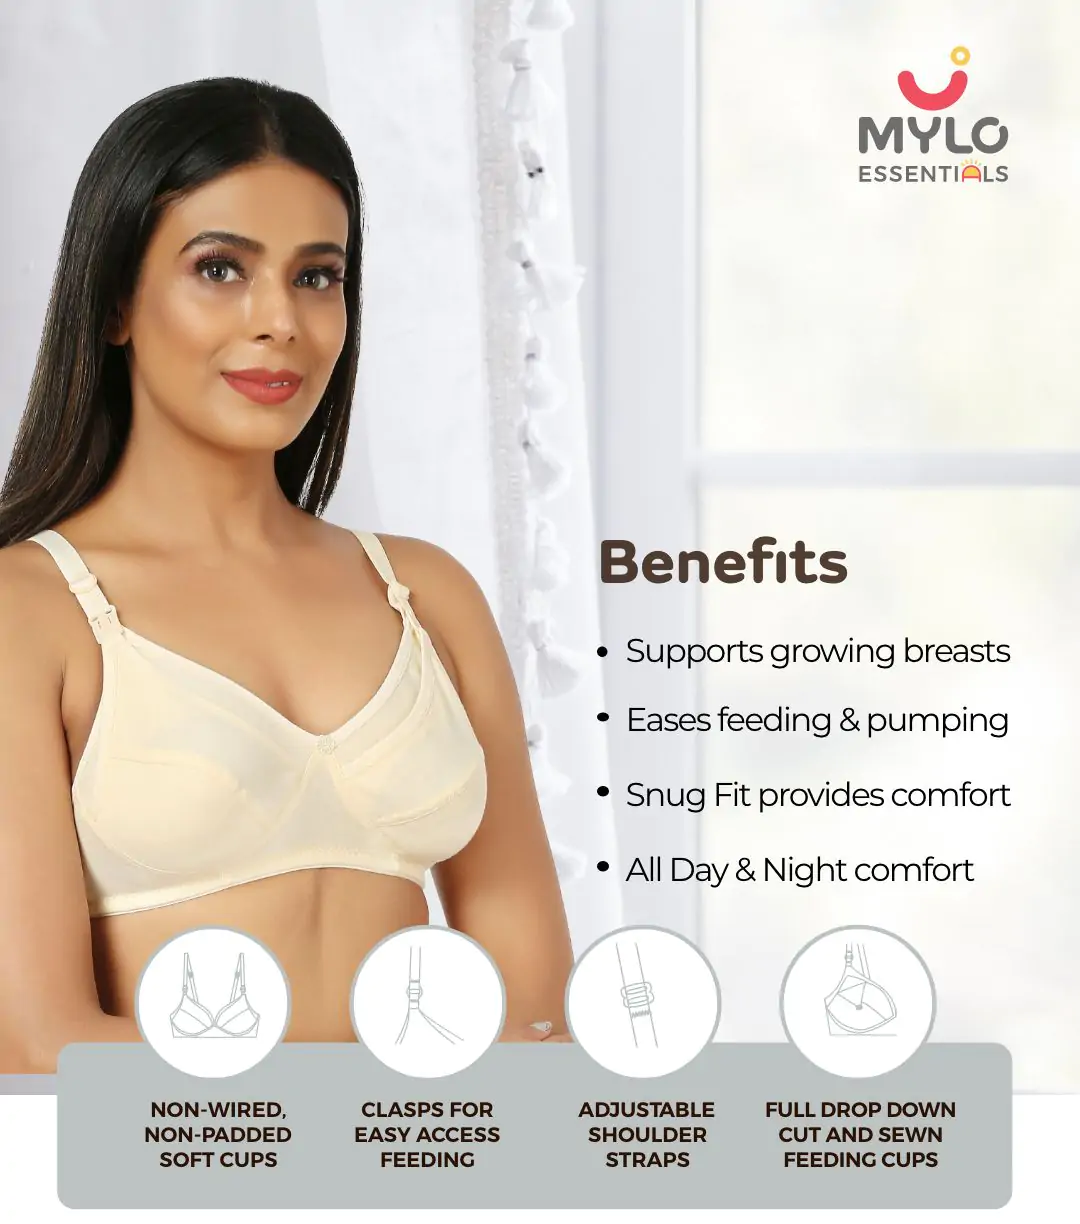 Non-Wired Non-Padded Maternity Bra/Feeding Bra with Free Bra Extender | Supports Growing Breasts | Eases Pumping & Feeding | Classic Black, Classic White, Magnolia Cream 40B about banner